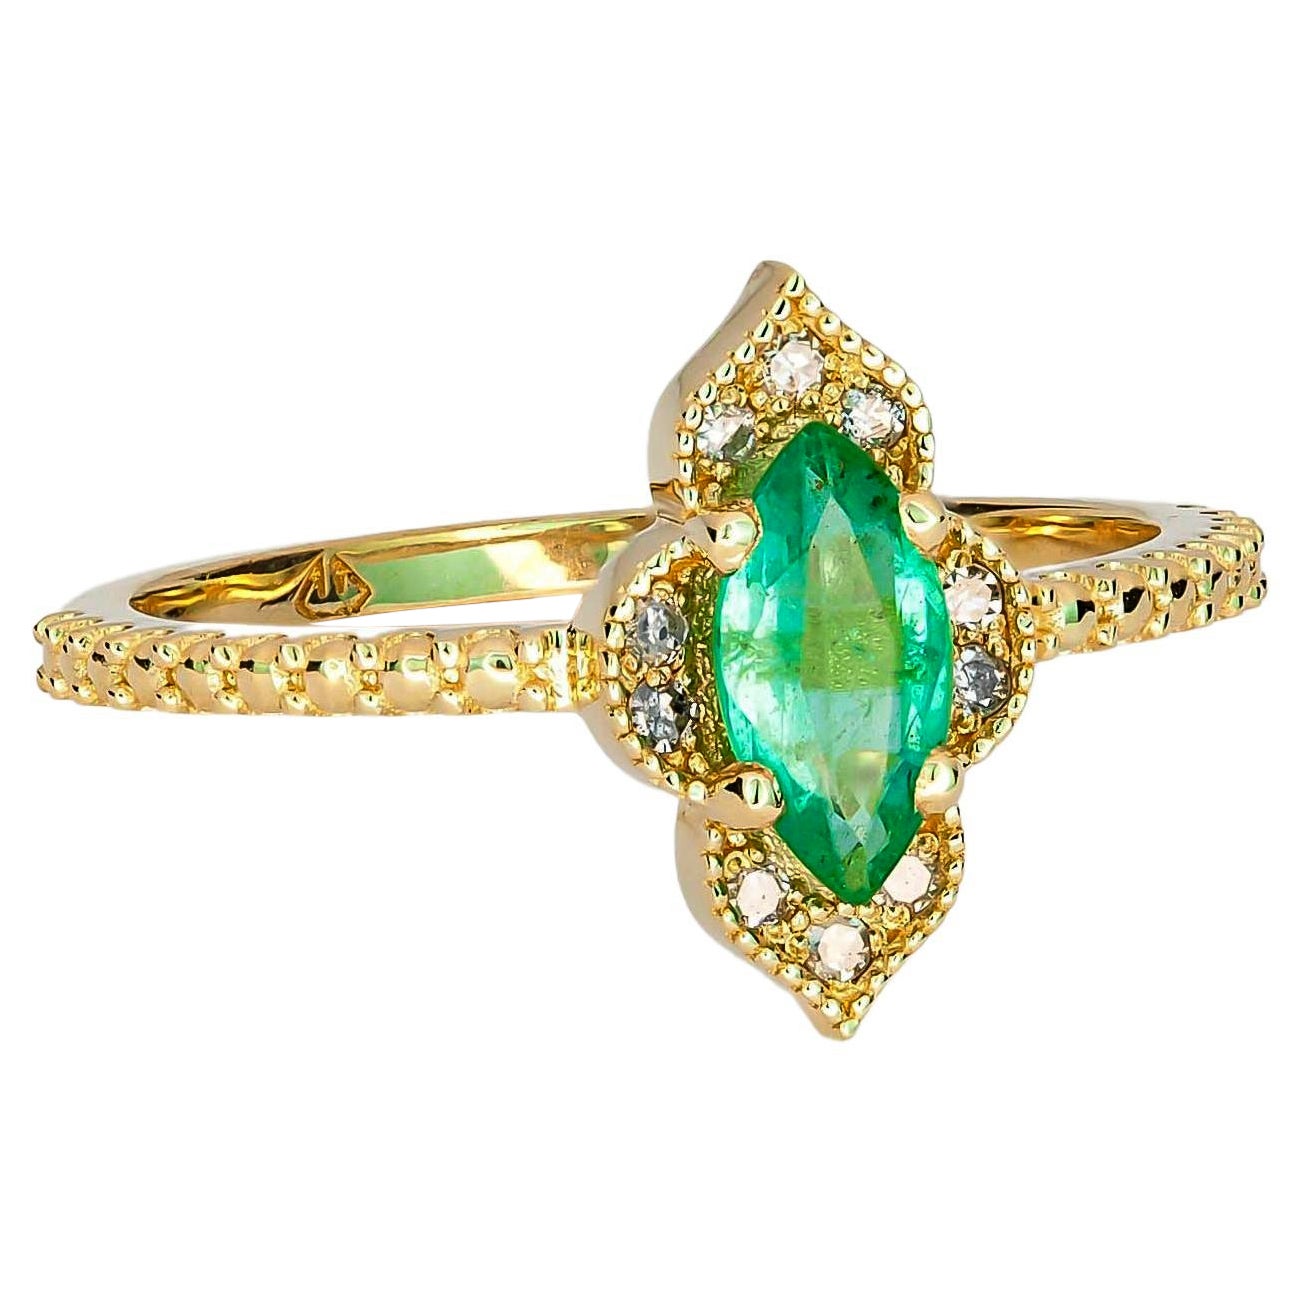 Emerald 14k Gold Ring, Emerald Vintage Ring, Marquise Emerald Ring